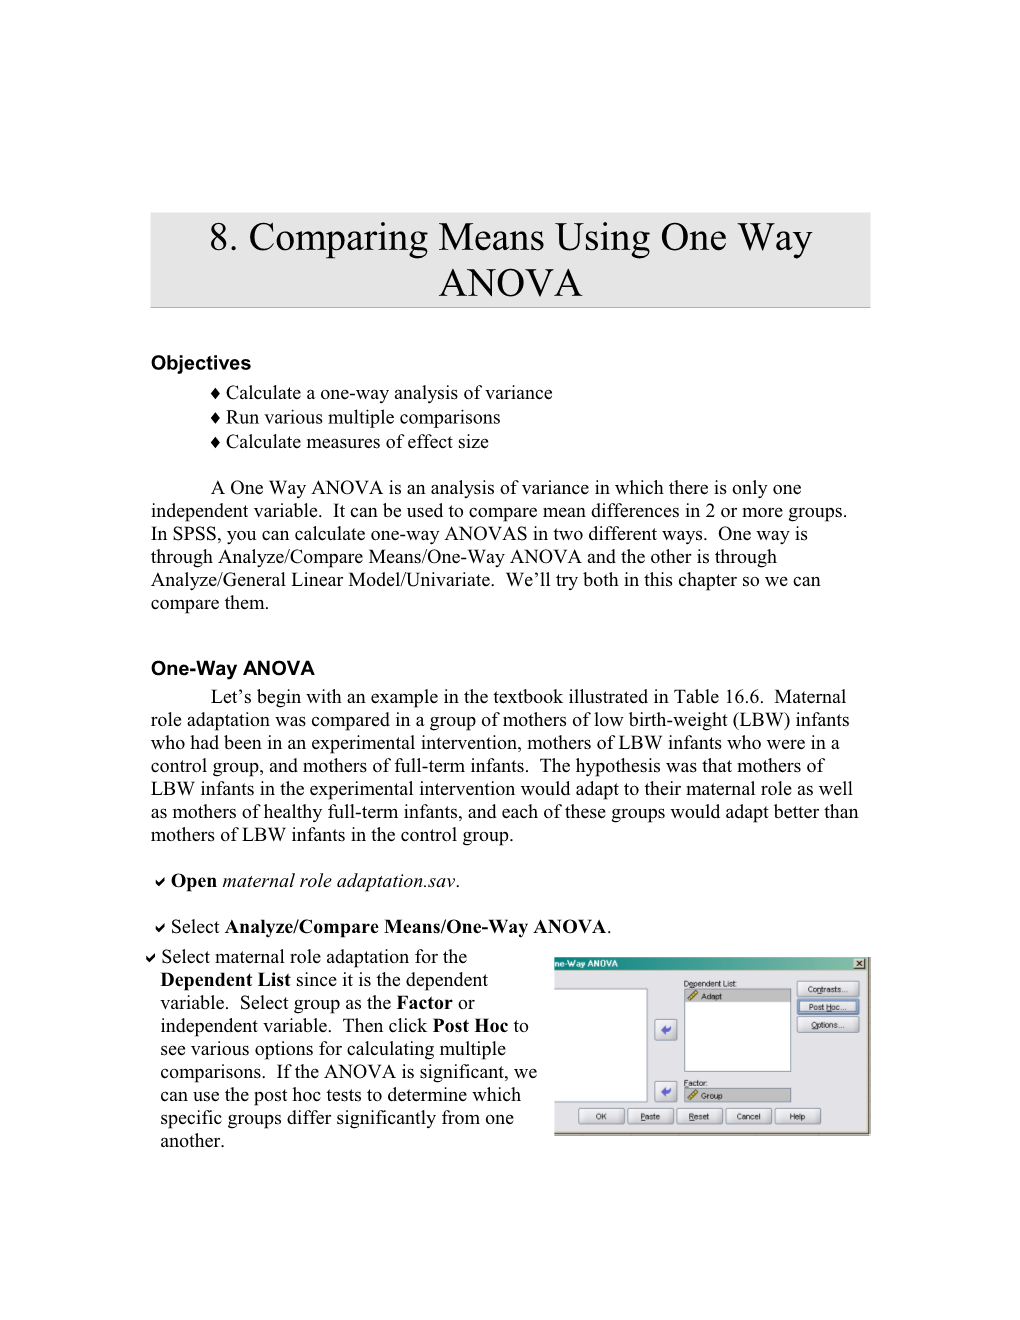 8. Comparing Means Using One Way ANOVA